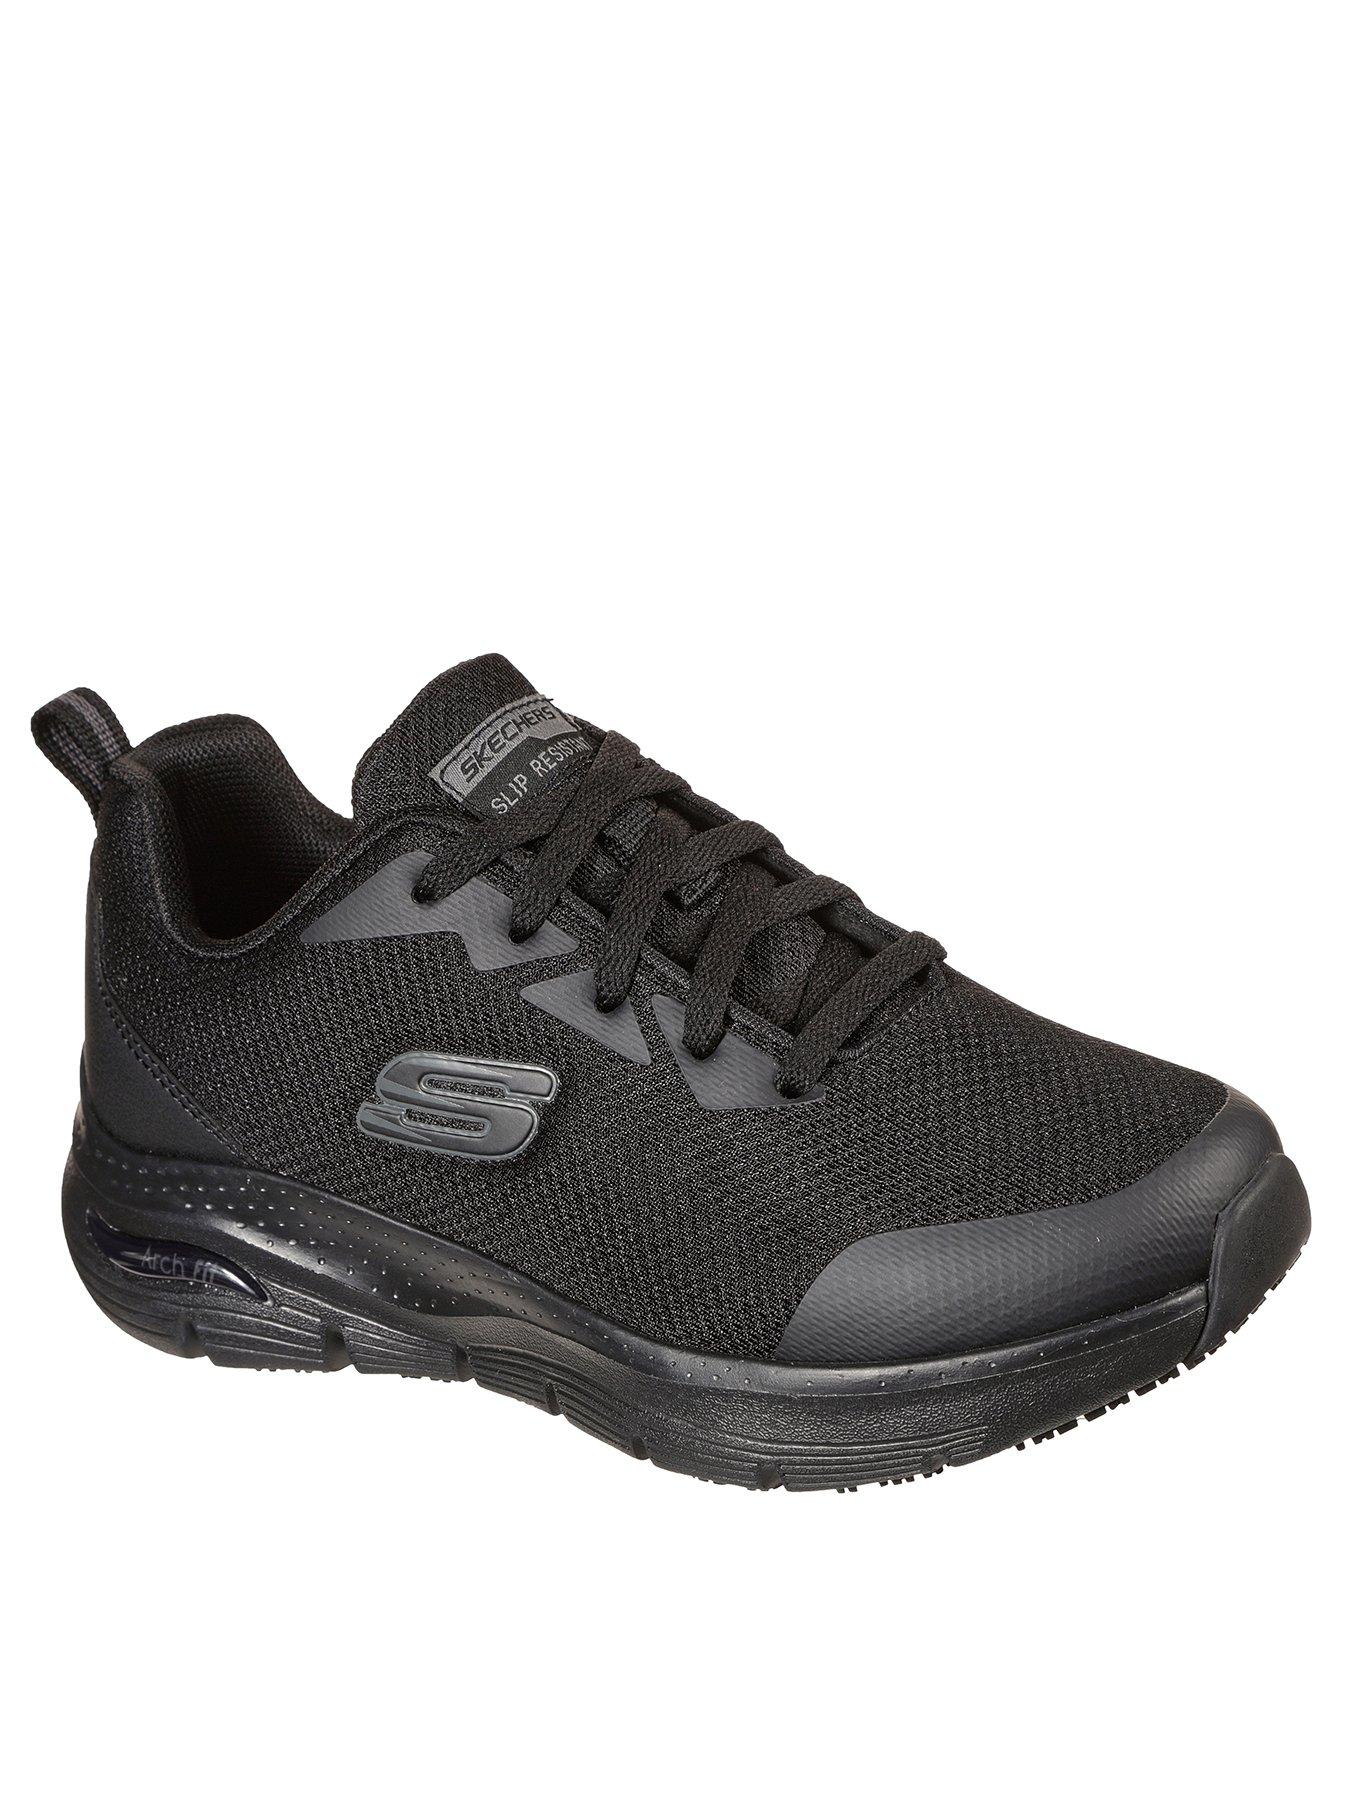 Skechers Arch Fit Sr Lace Up Athletic Workwear Trainers - Black | very ...